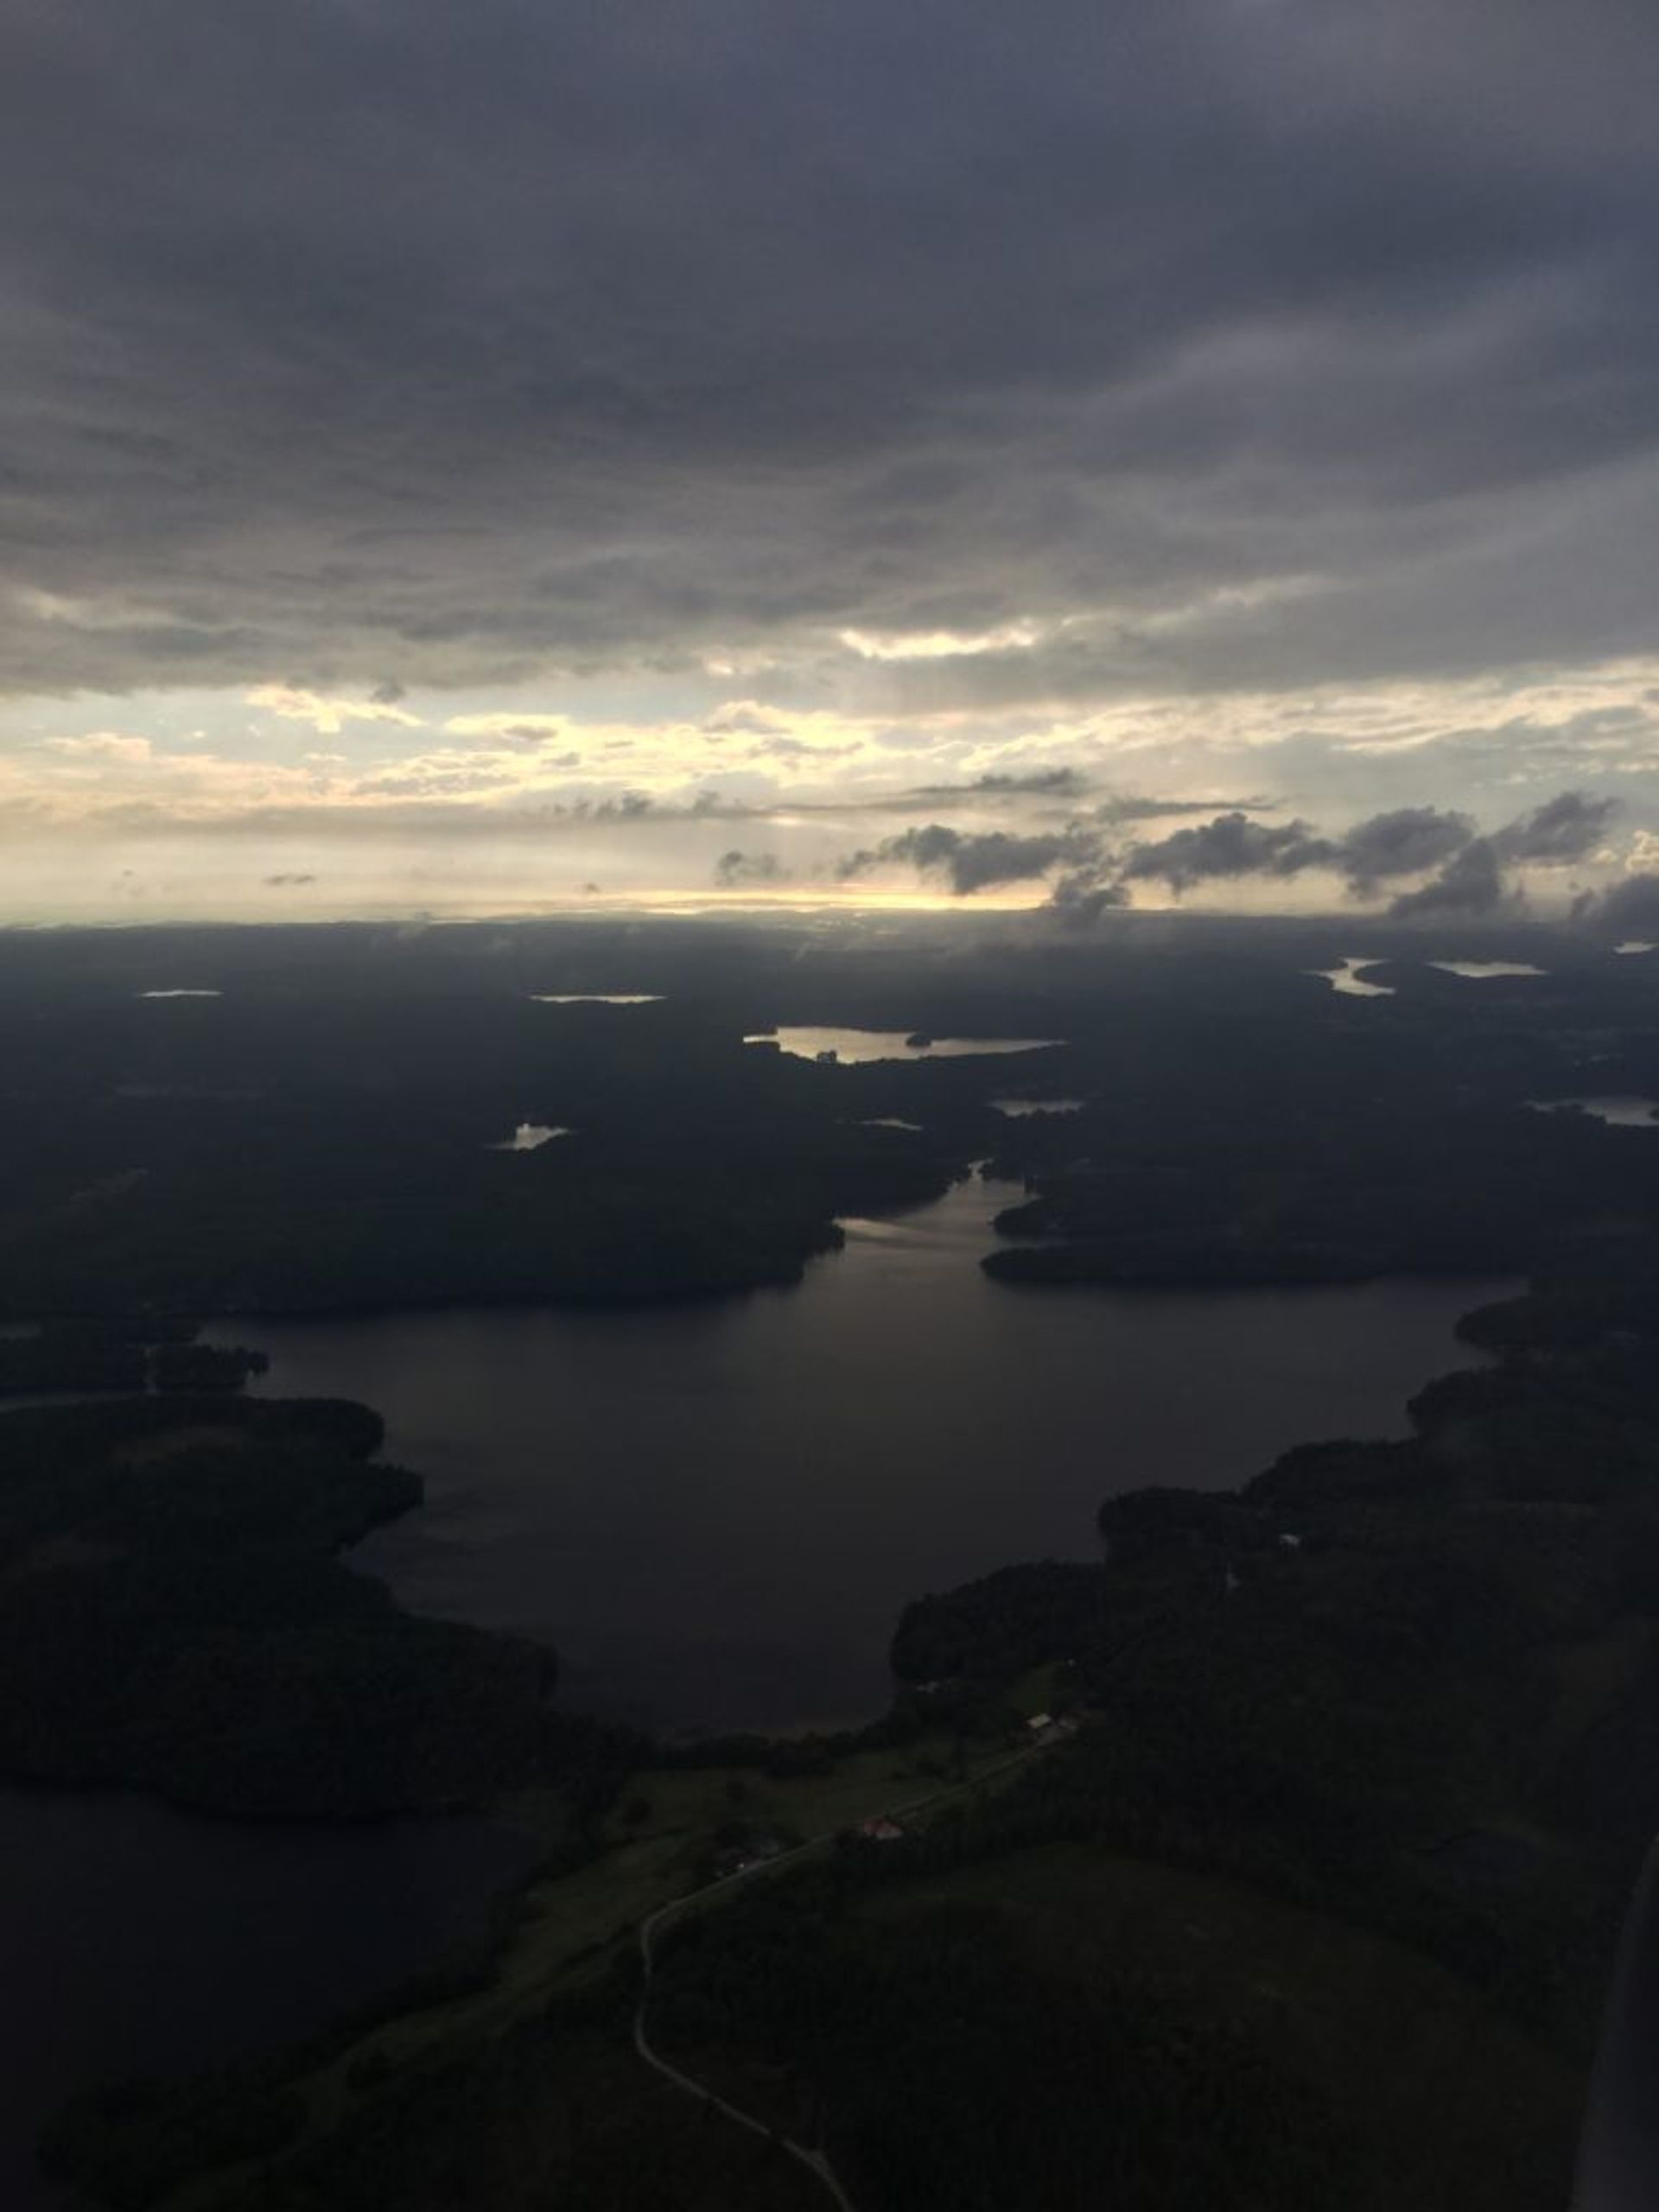 A view from the plane, touching down in Sweden / Photo credit: Emma 